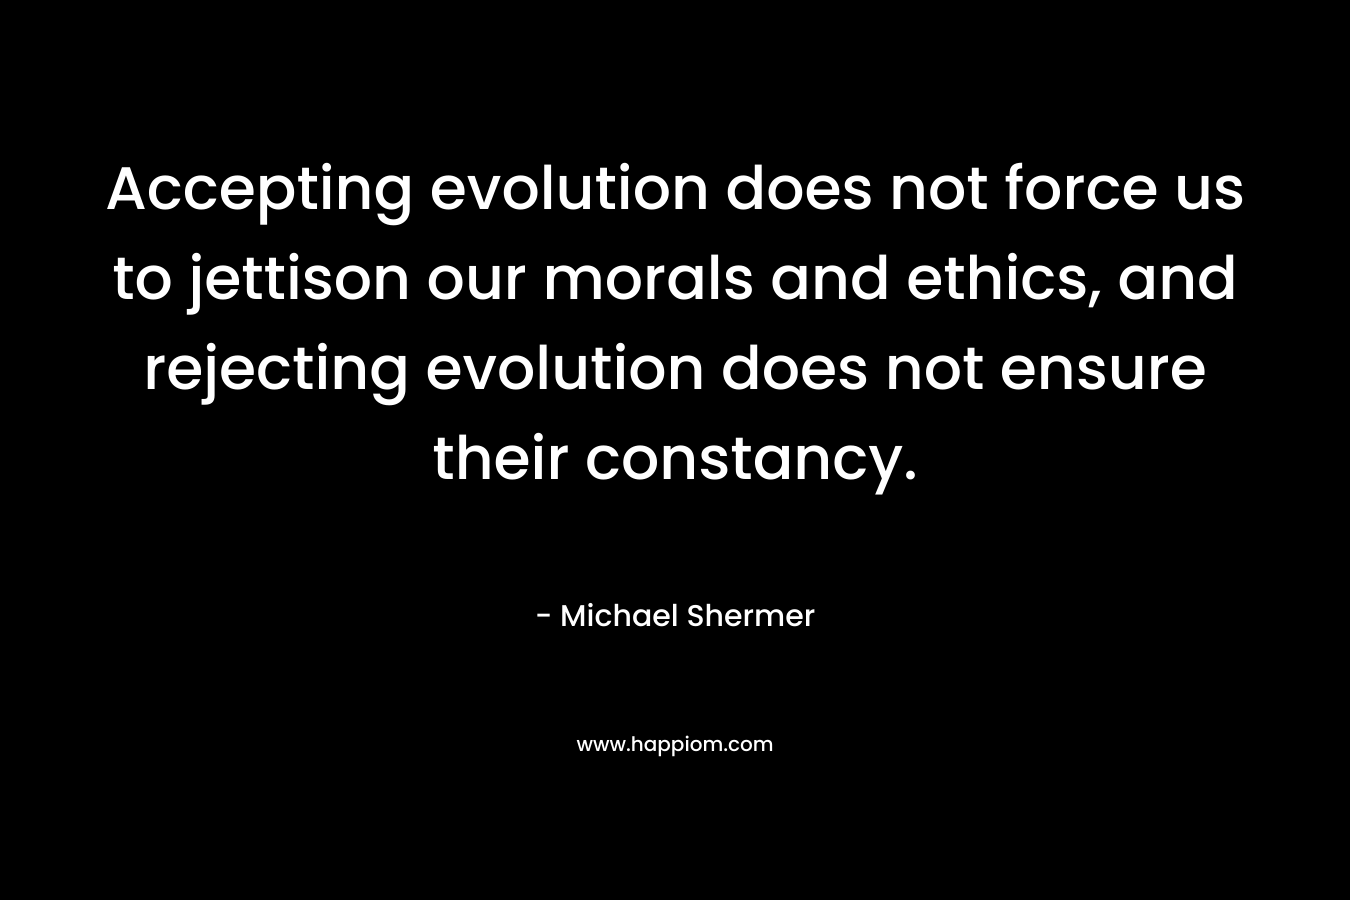 Accepting evolution does not force us to jettison our morals and ethics, and rejecting evolution does not ensure their constancy.